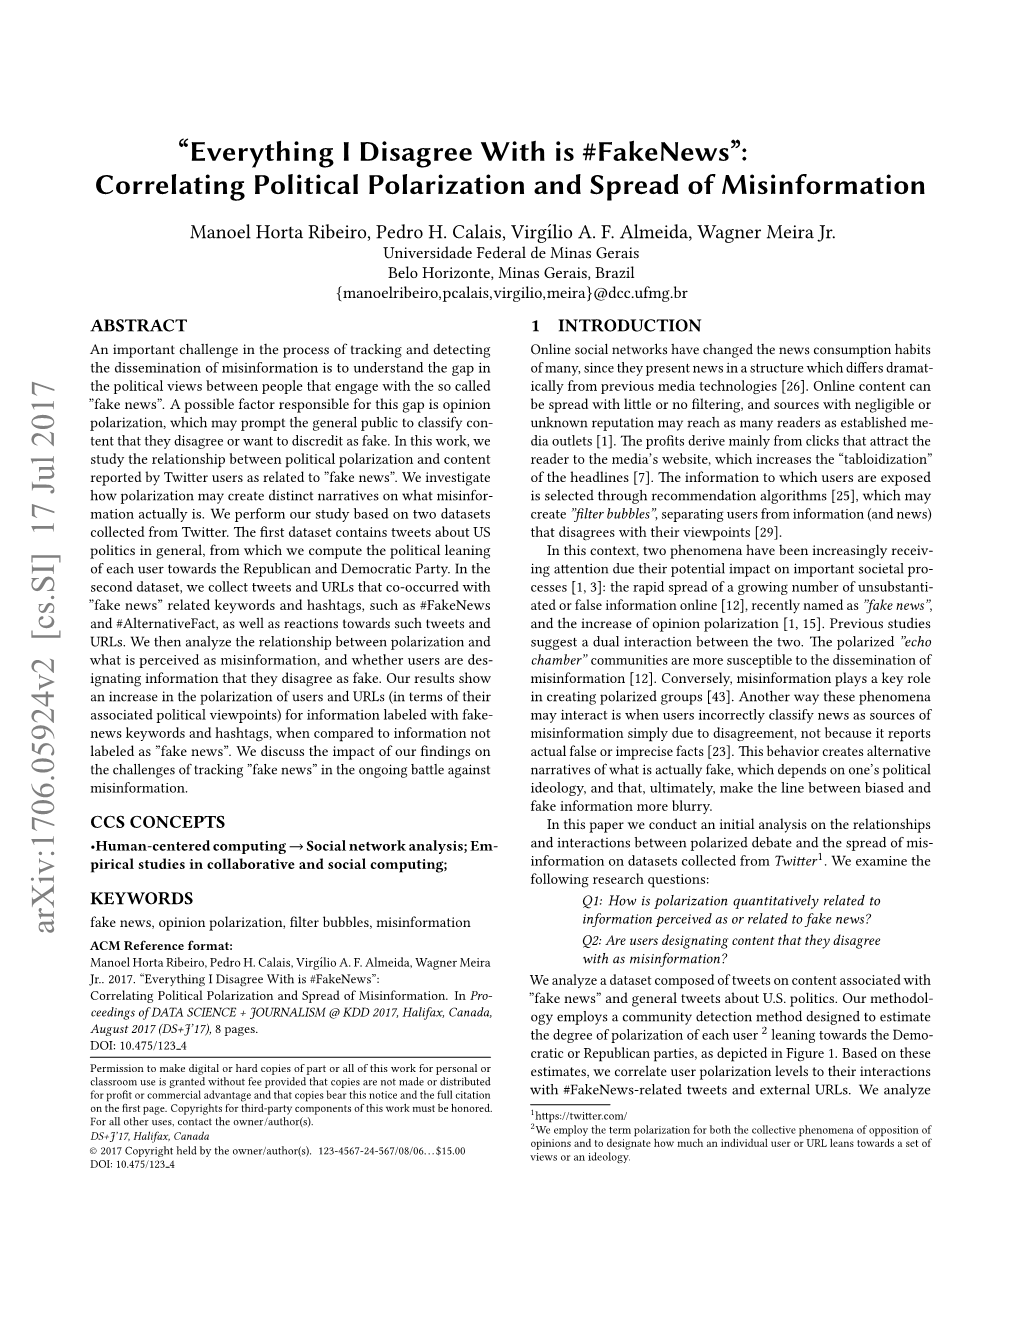 Correlating Political Polarization and Spread of Misinformation